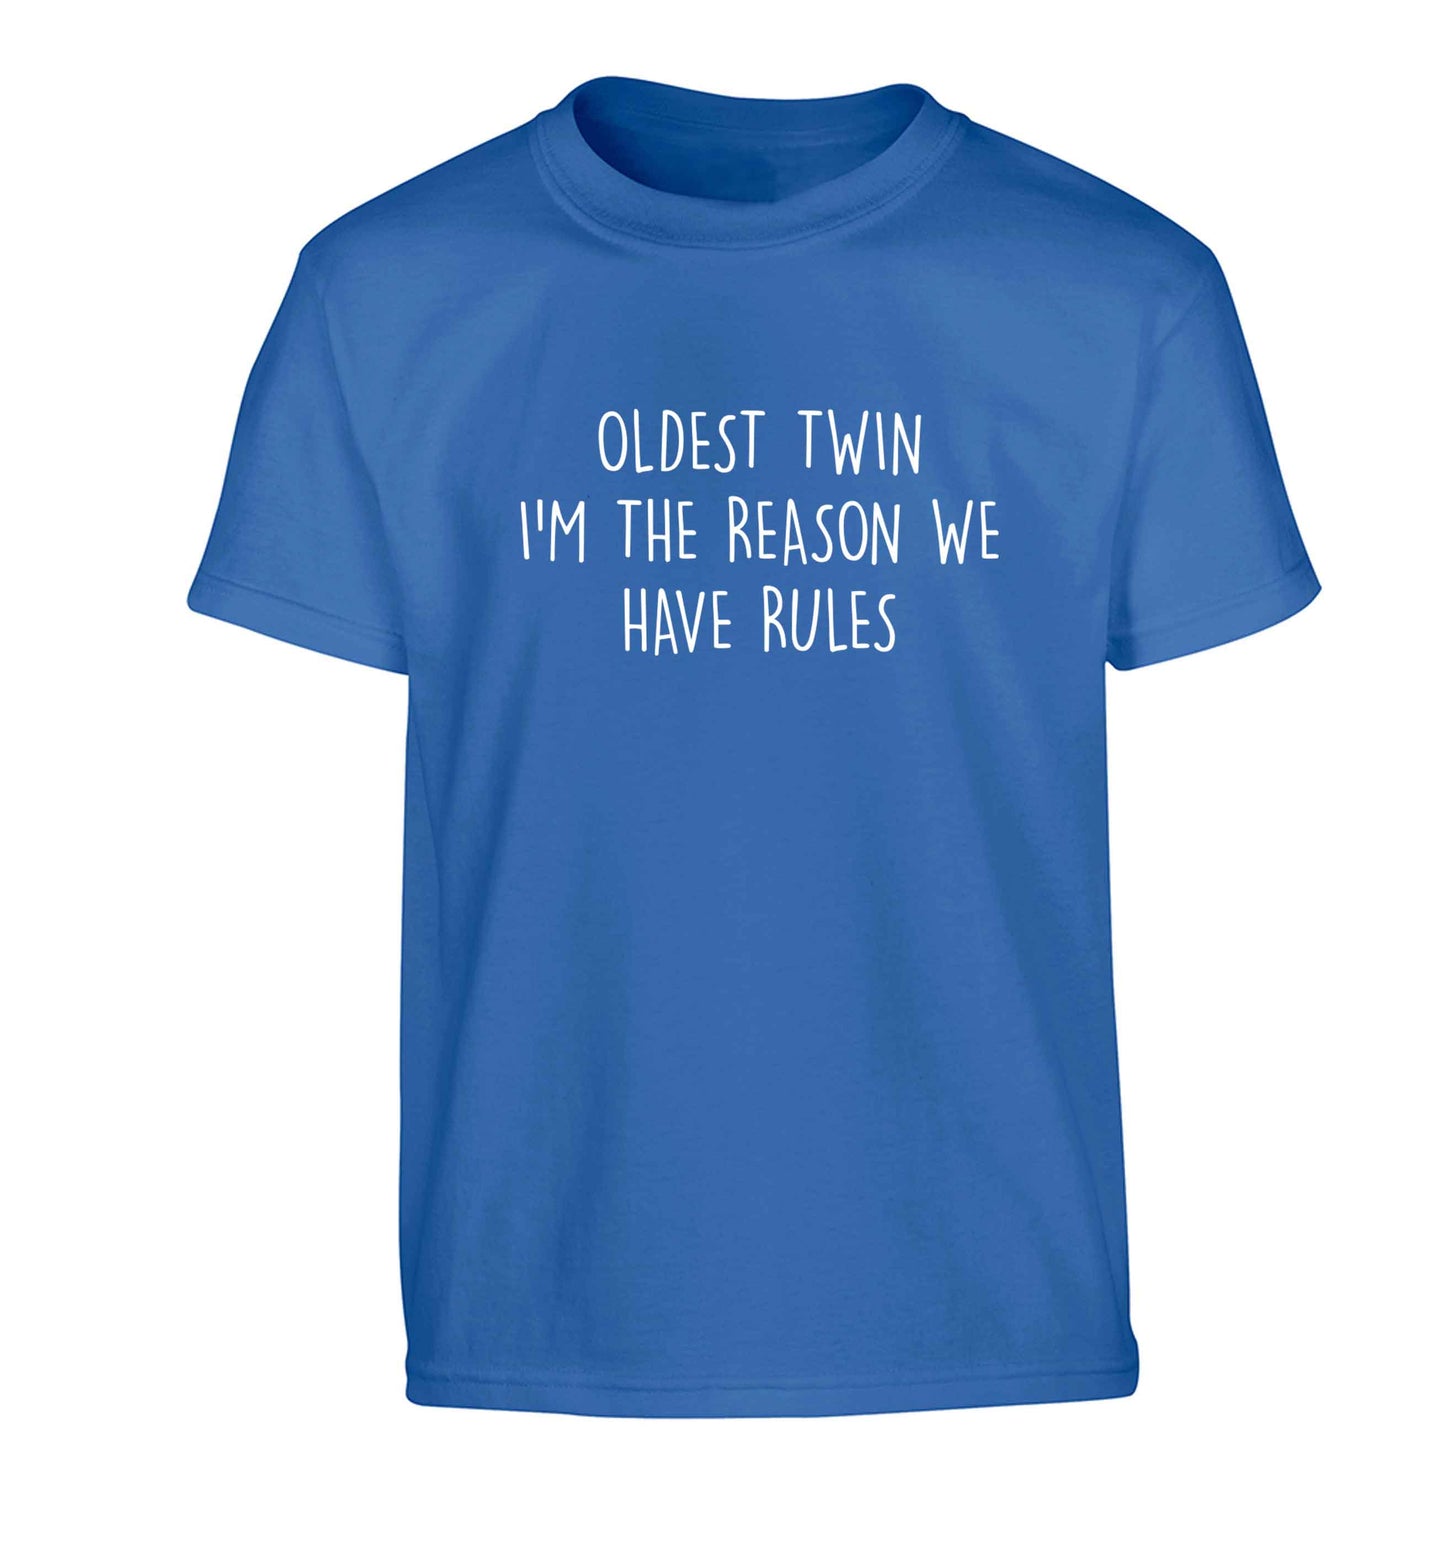 Oldest twin I'm the reason we have rules Children's blue Tshirt 12-13 Years